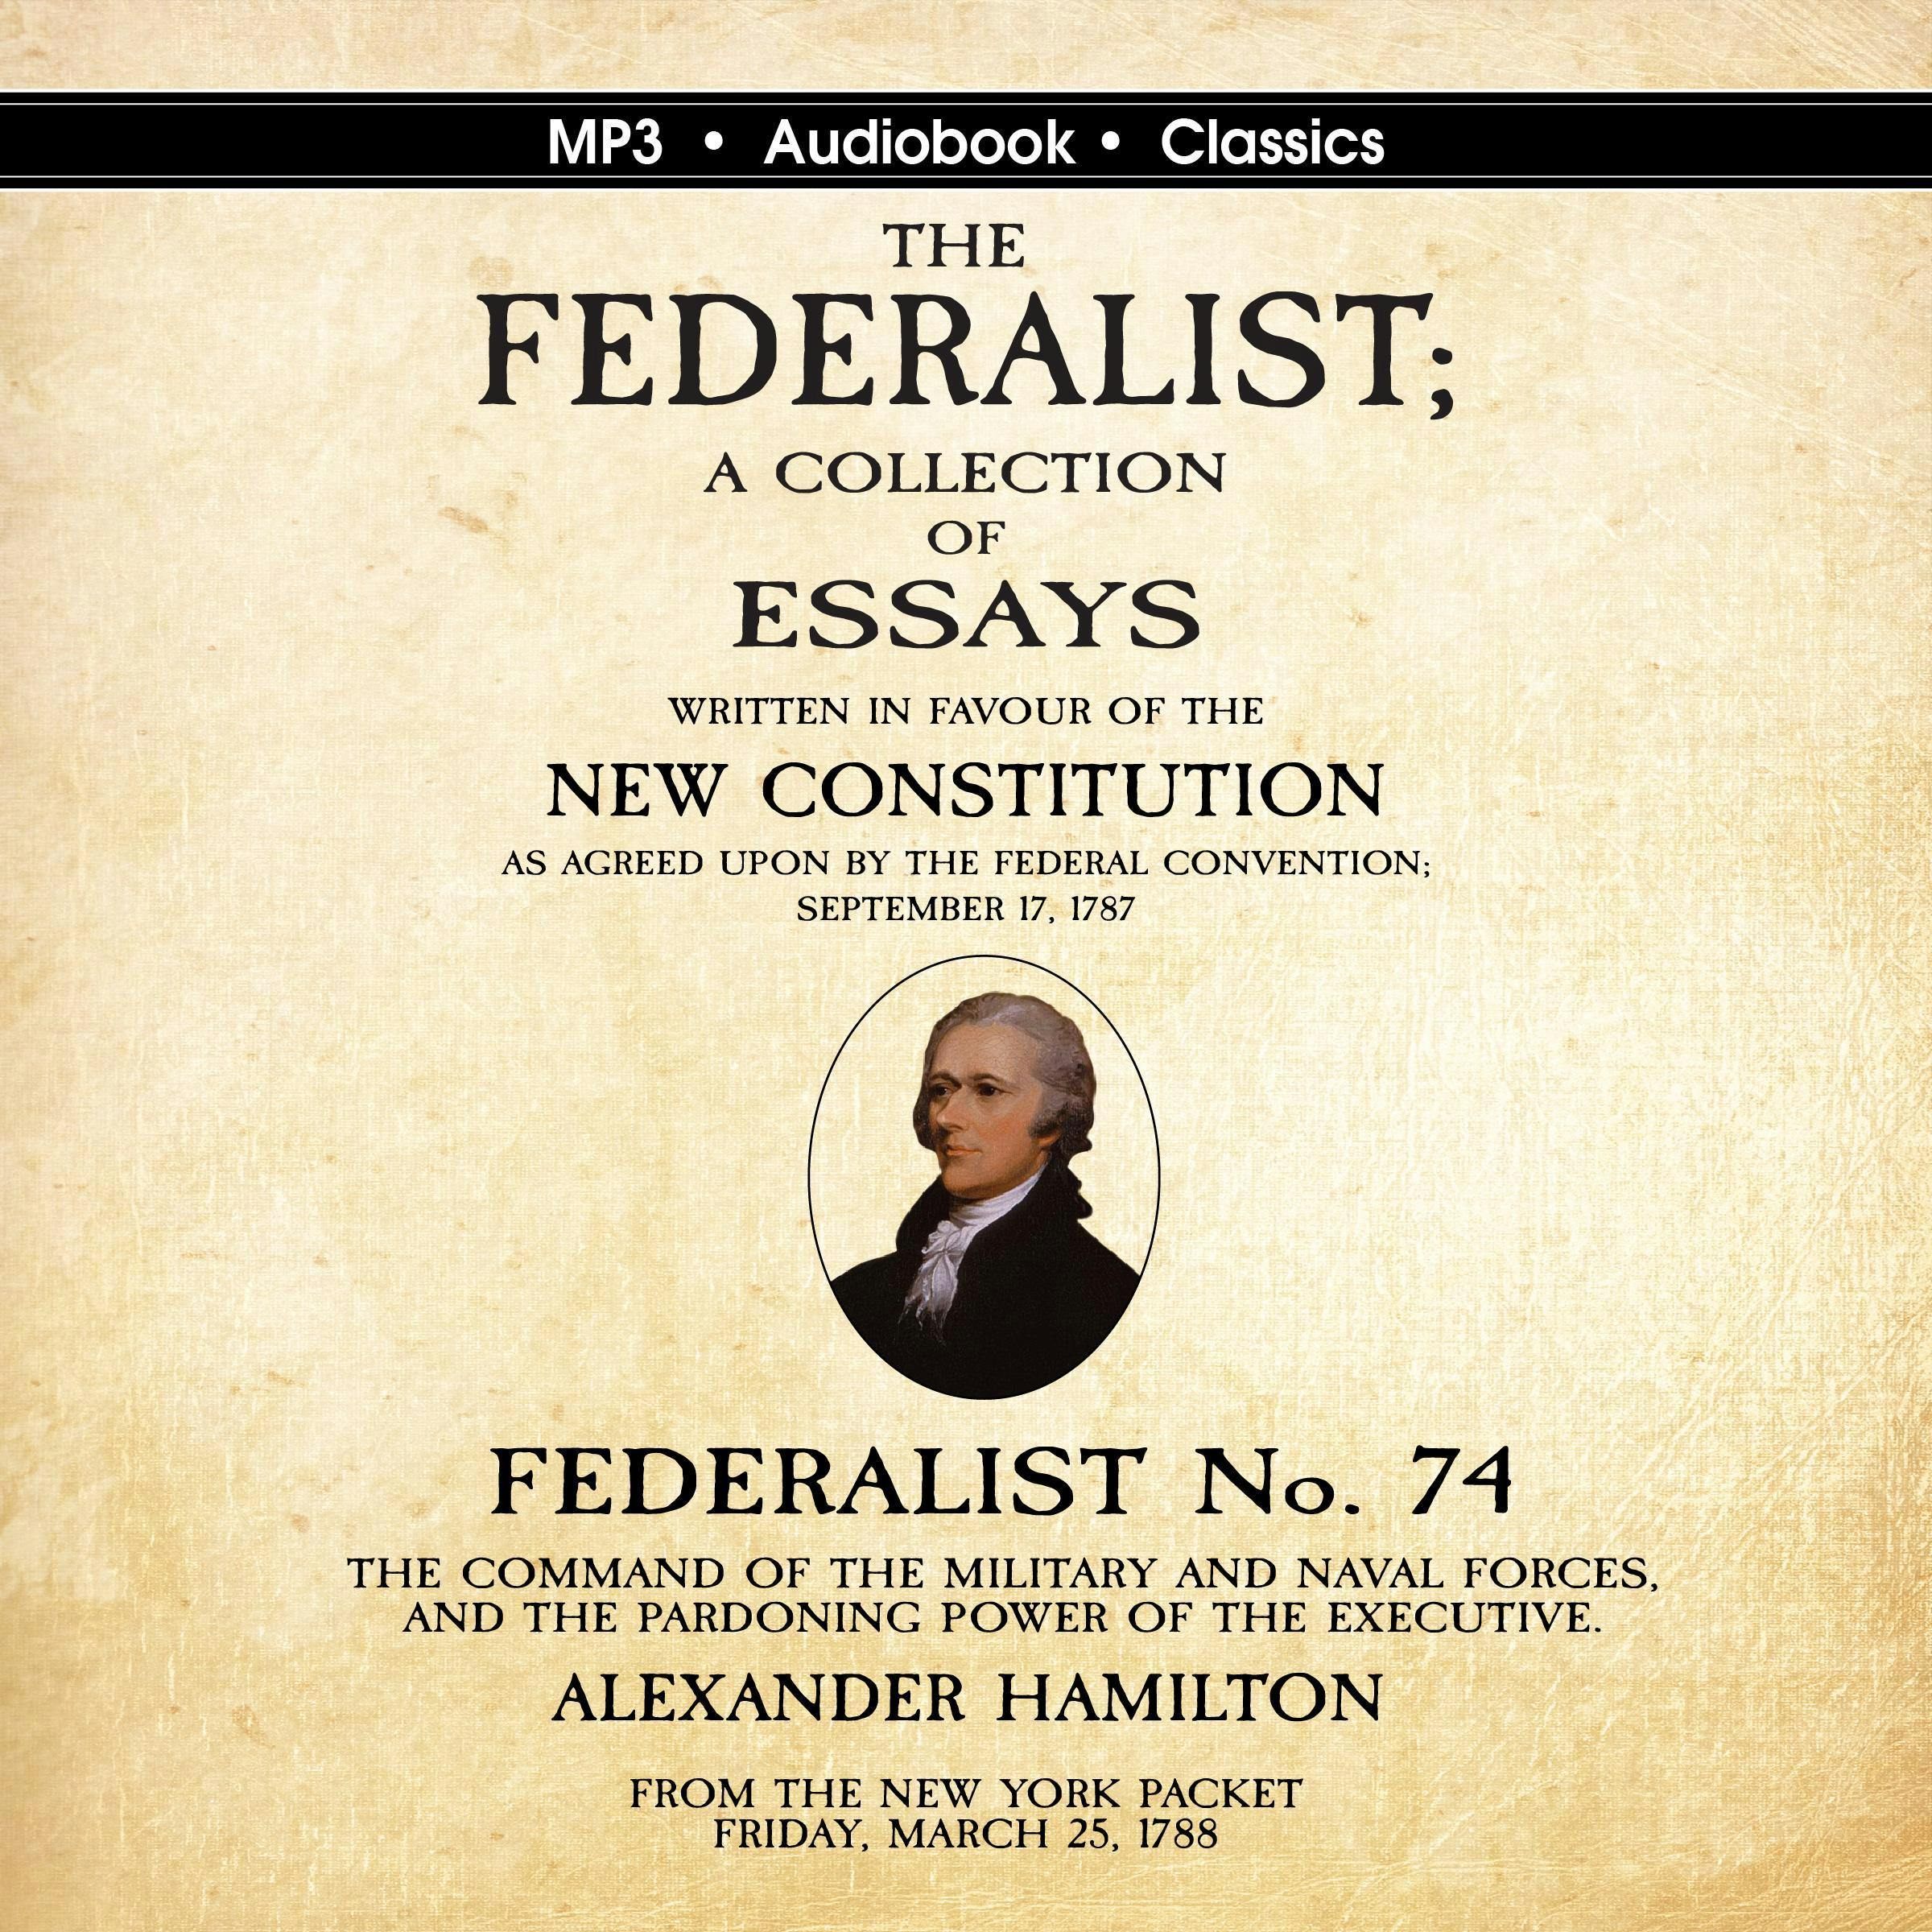 Federalist No. 74. The Command of the Military and Naval Forces, and the Pardoning Power of the Executive. - Alexander Hamilton